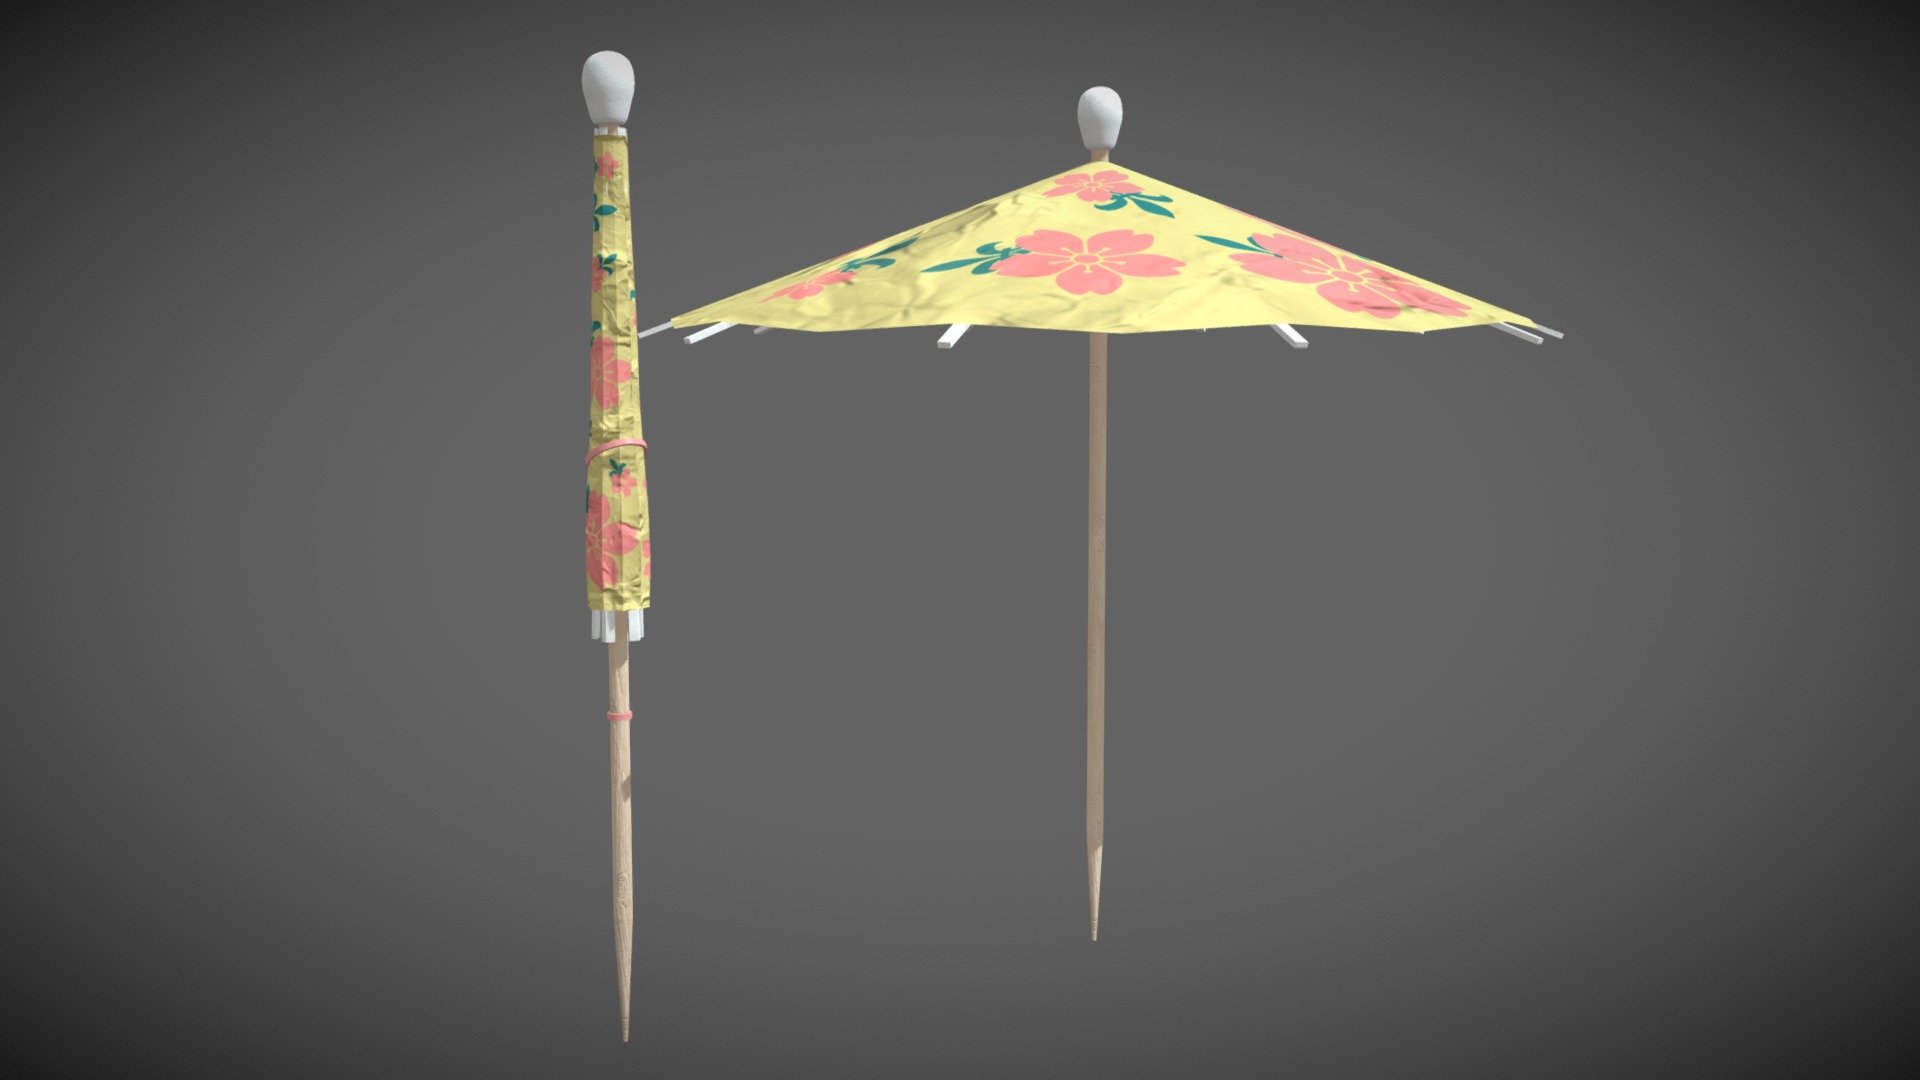 HQ - Cocktail Umbrella Garnish. Mostly quaded and UVed 3d model